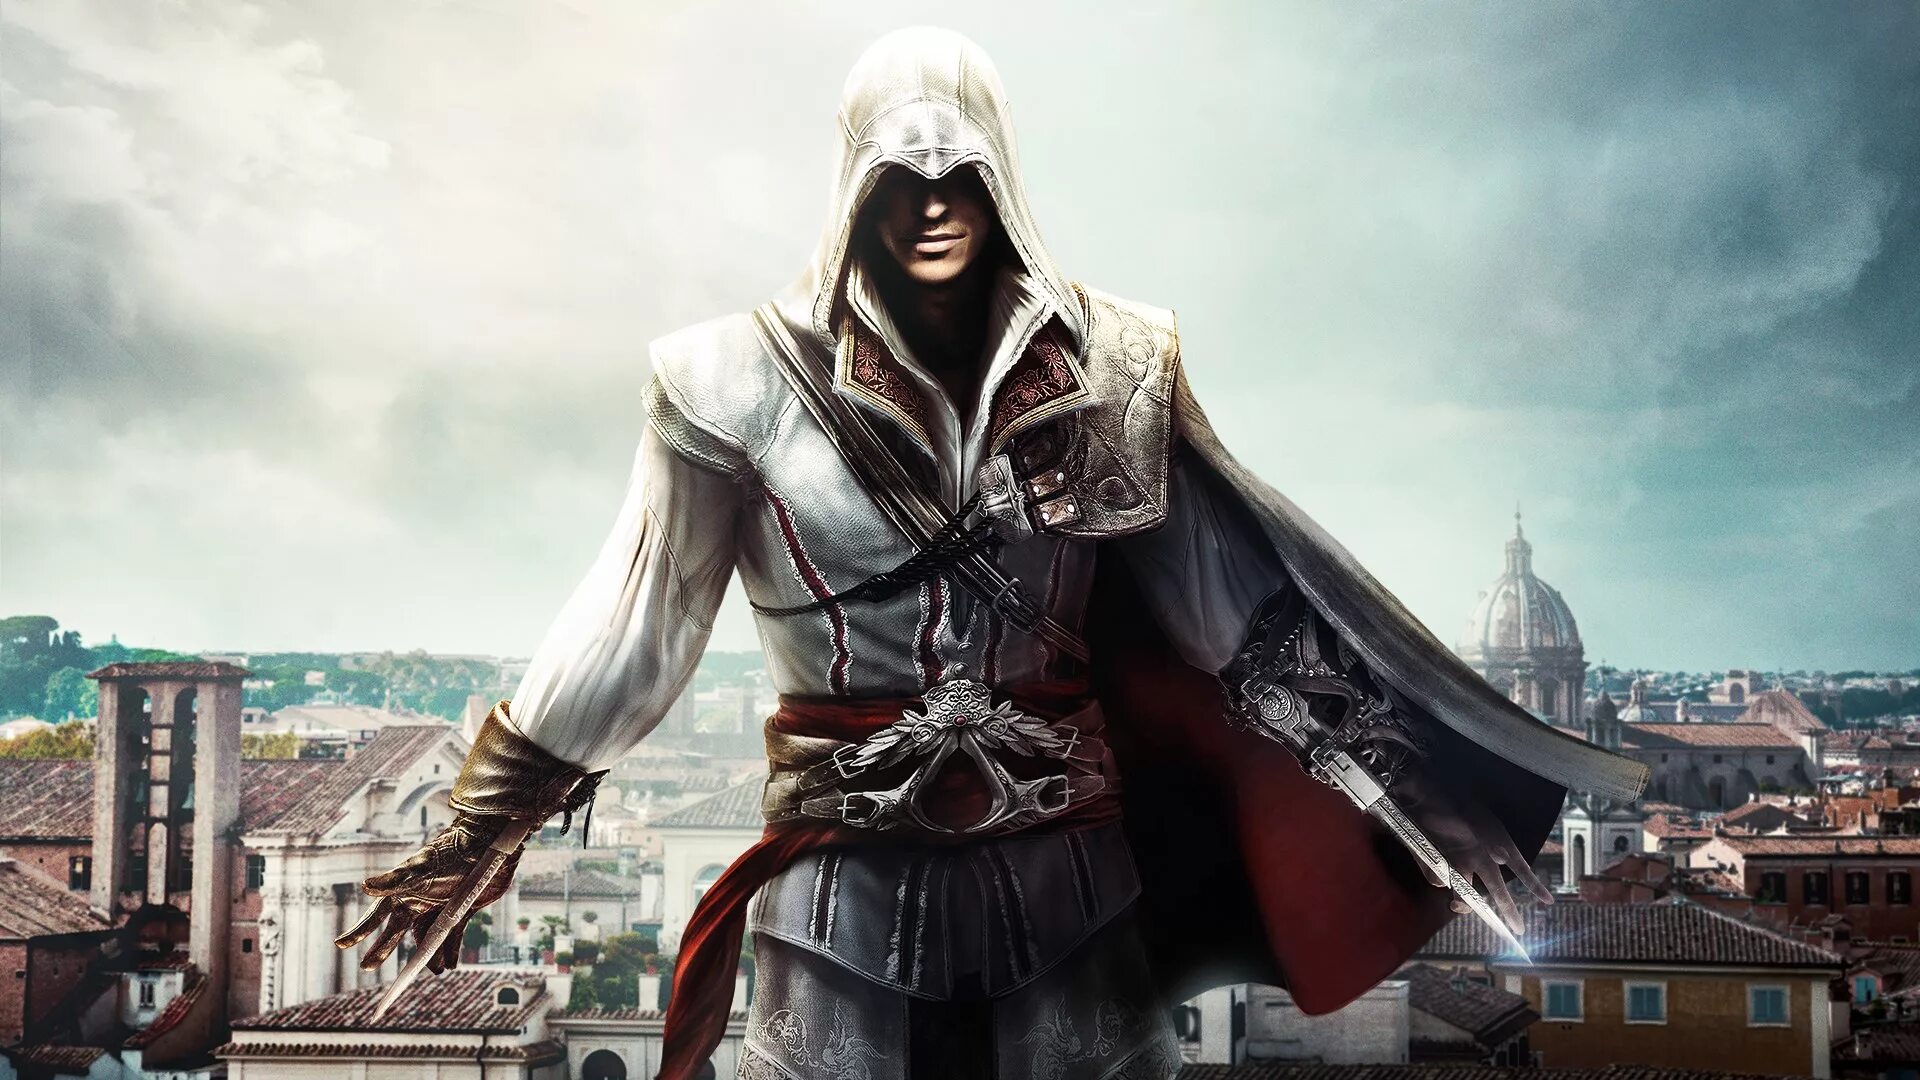 Assassin s ezio collection. Assassin's Creed Эцио. Ассасин Крид 2. Assassin's Creed 2 Эцио Аудиторе. Ассасин Крид 2 Эцио Аудиторе.